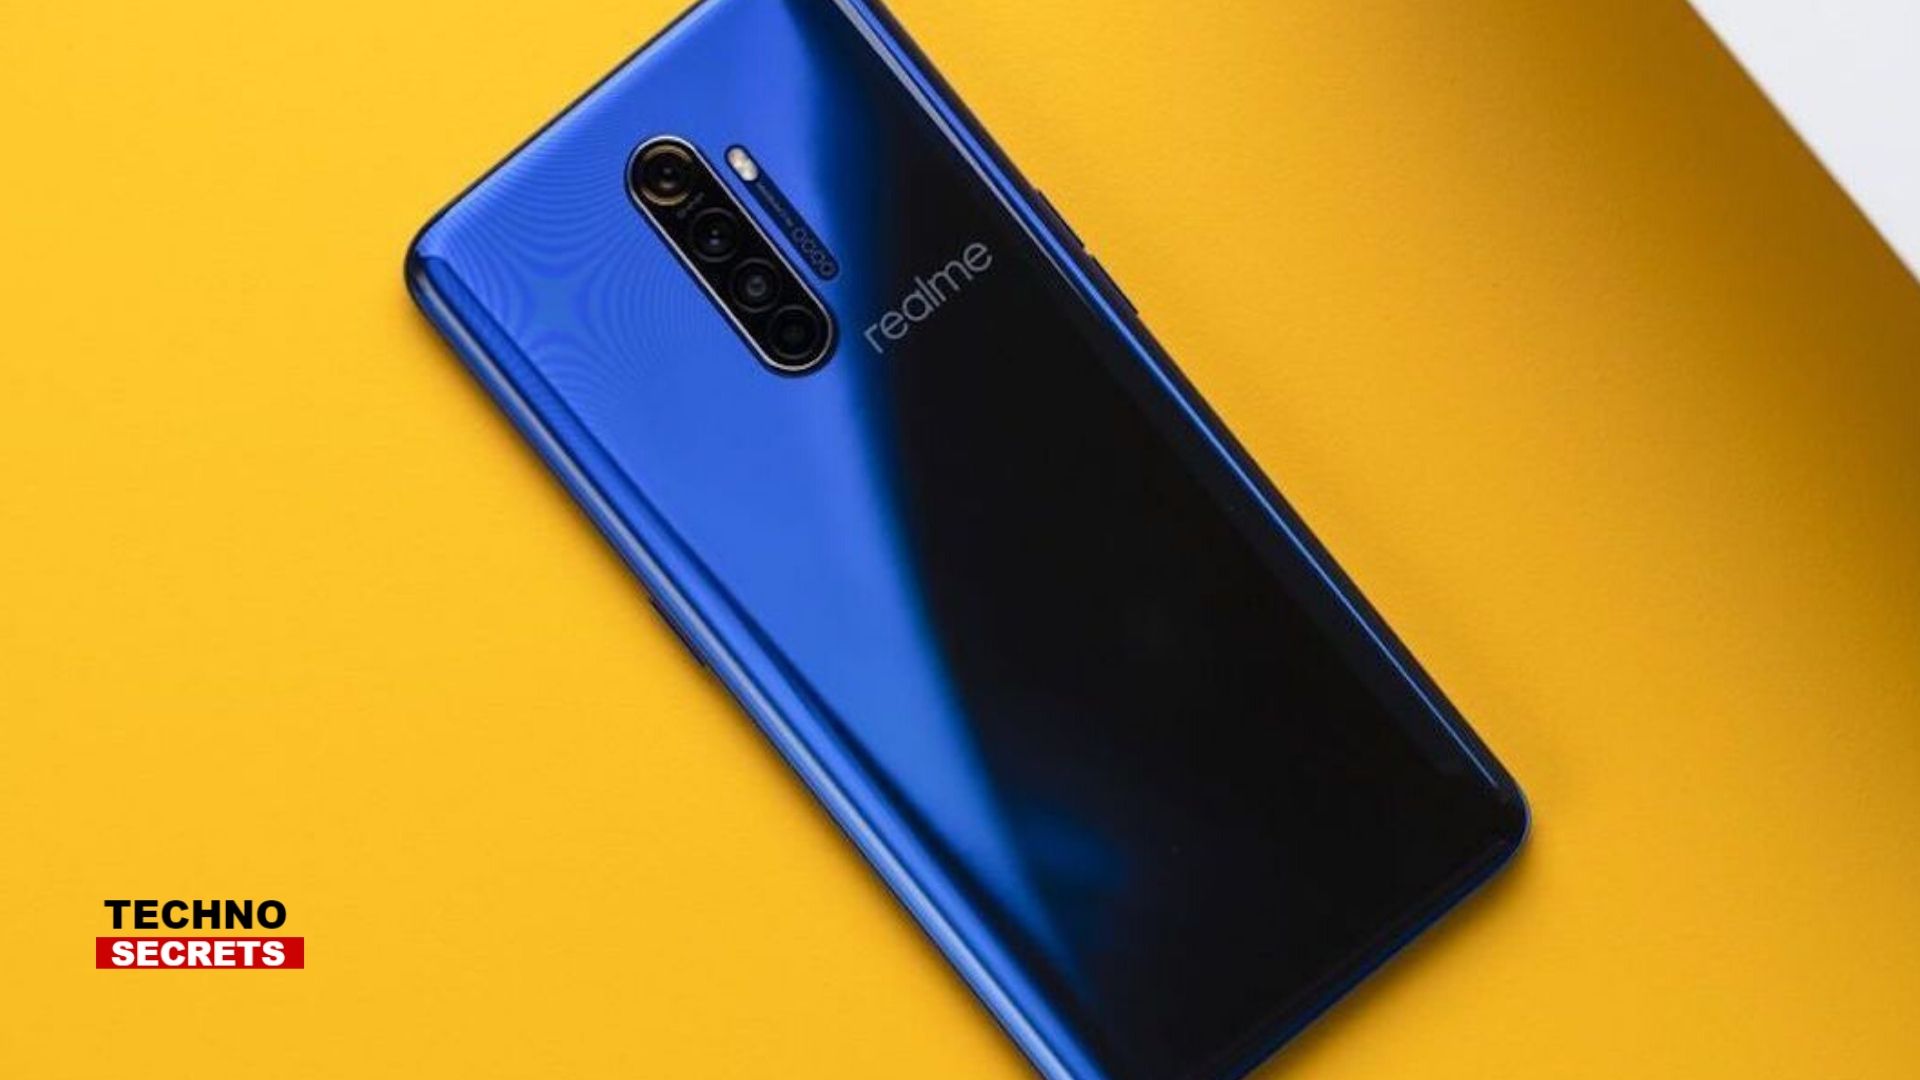 Realme Working on a 108-Megapixel Camera Phone, Company’s India CEO reveals